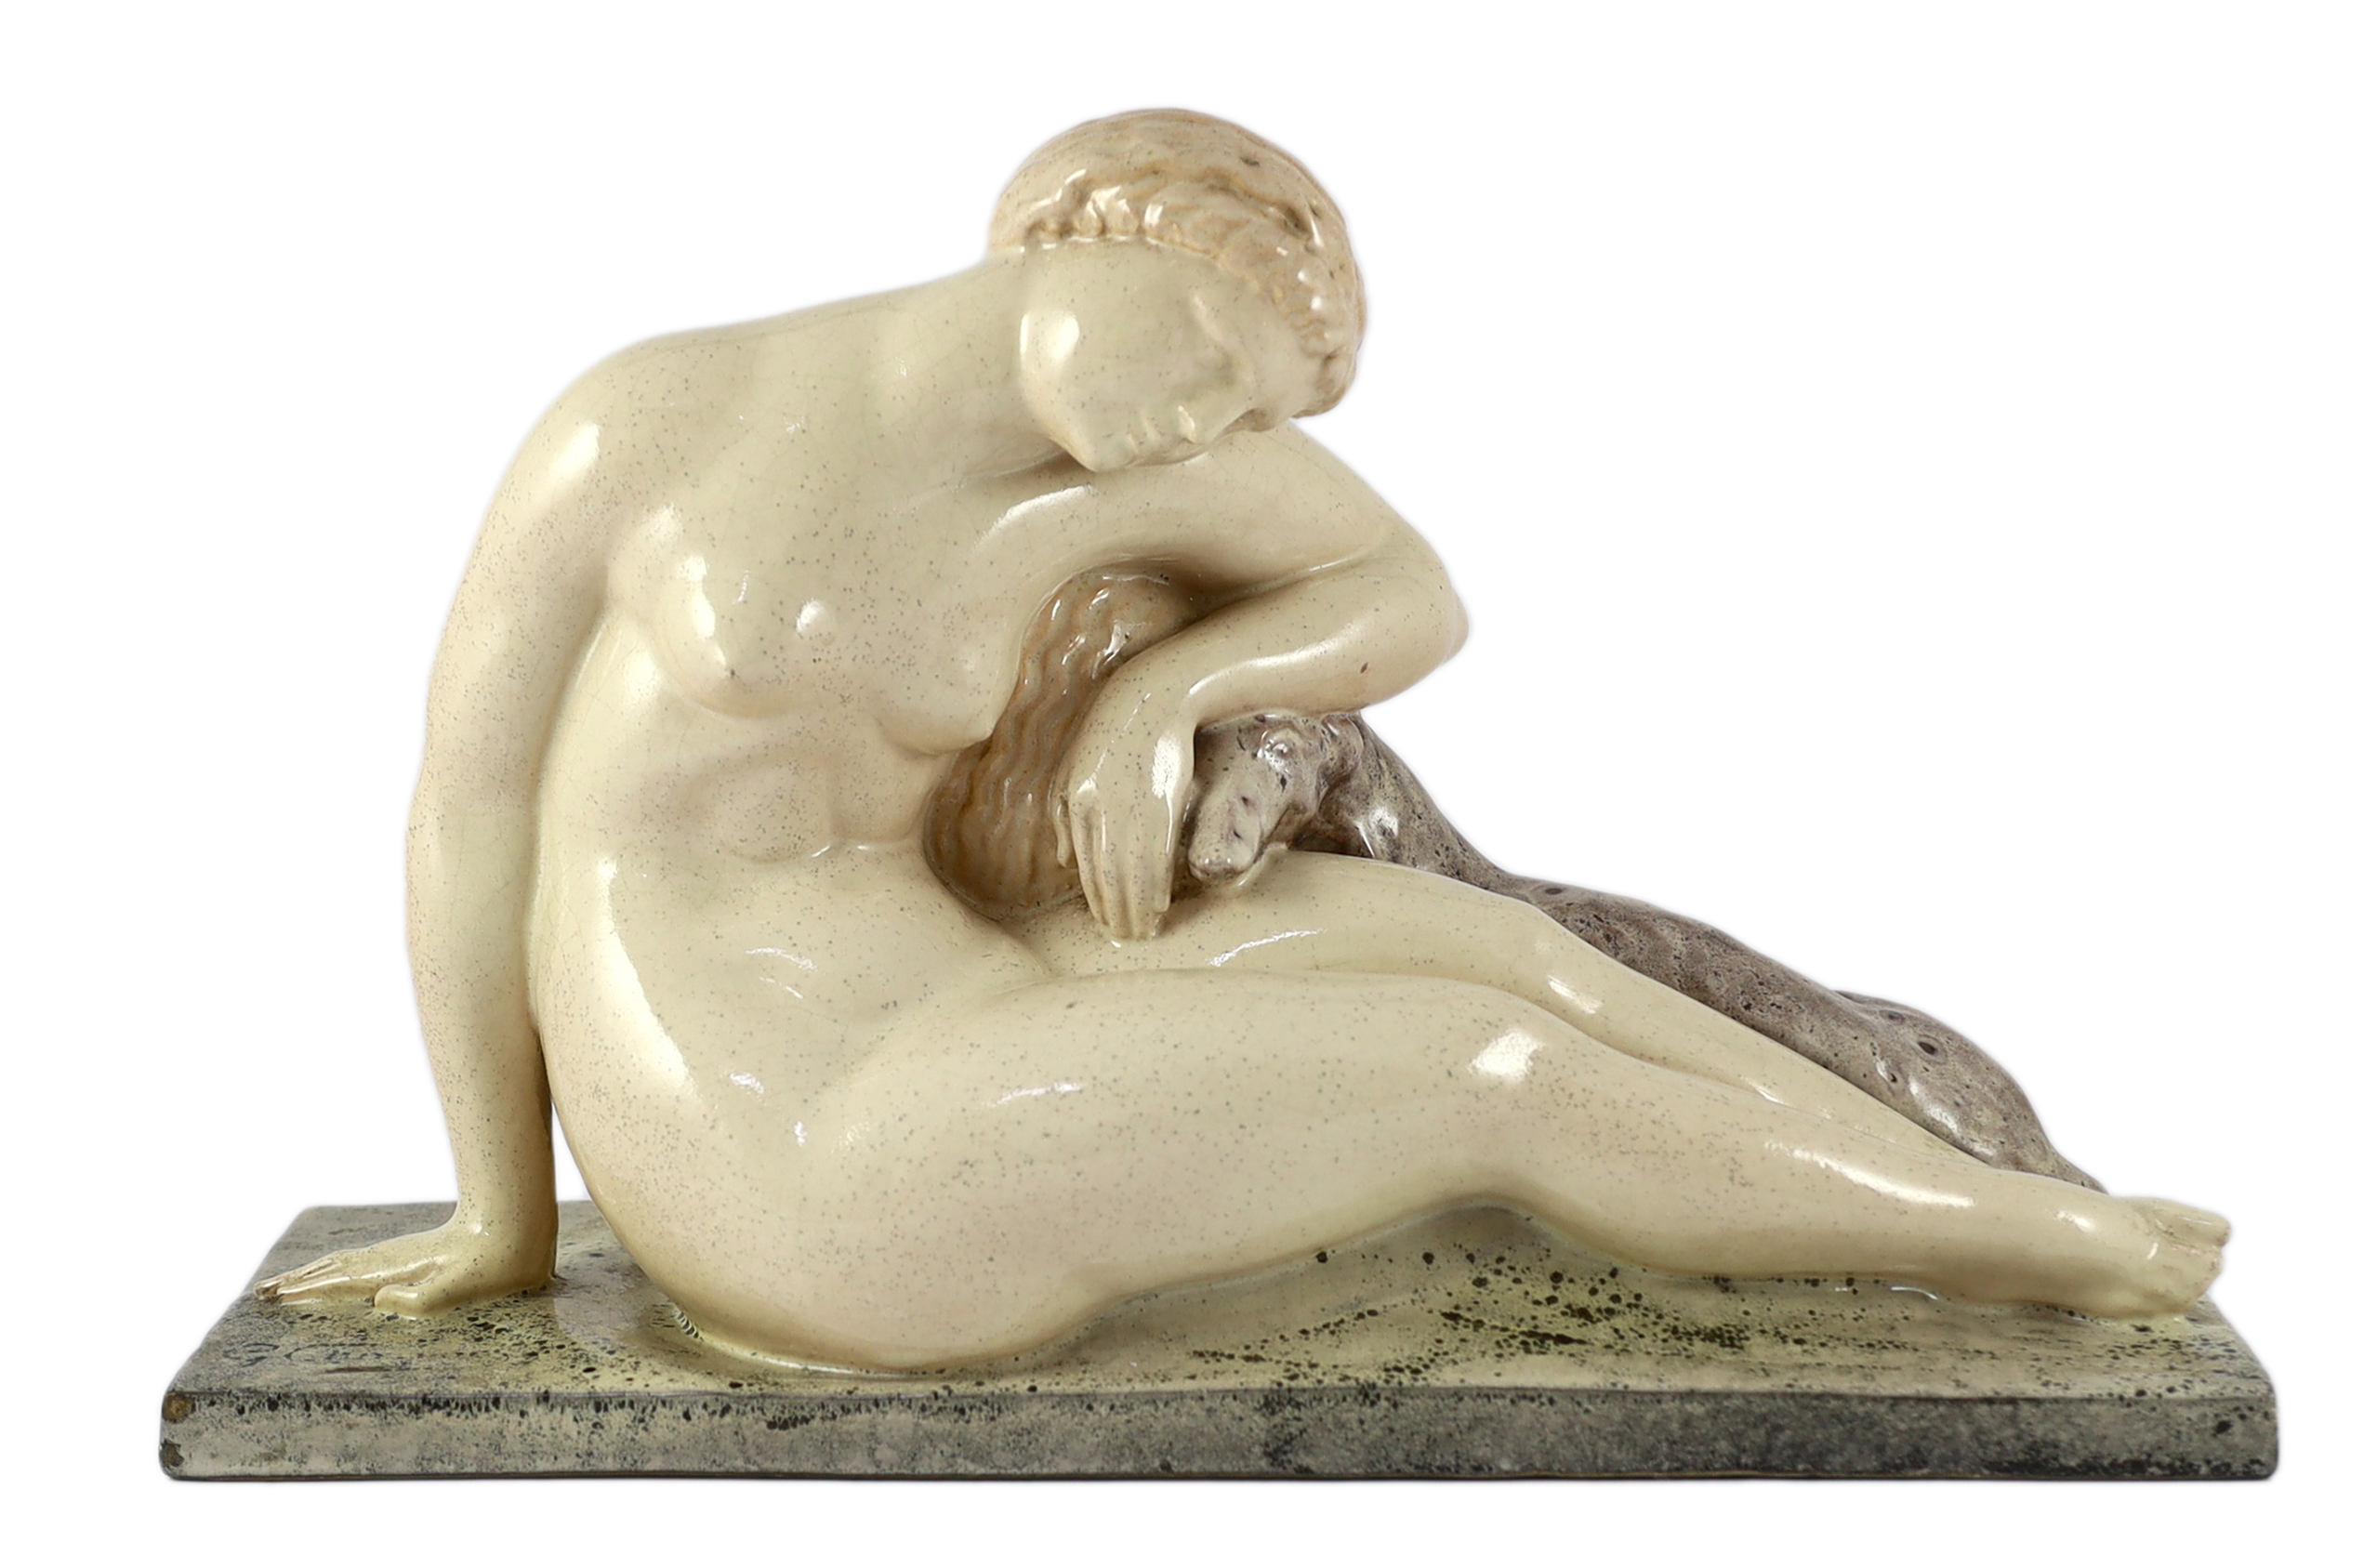 Georges Chauvel (French 1886-1962). An Art Deco ceramic figure of a sleeping Diana                                                                                                                                          